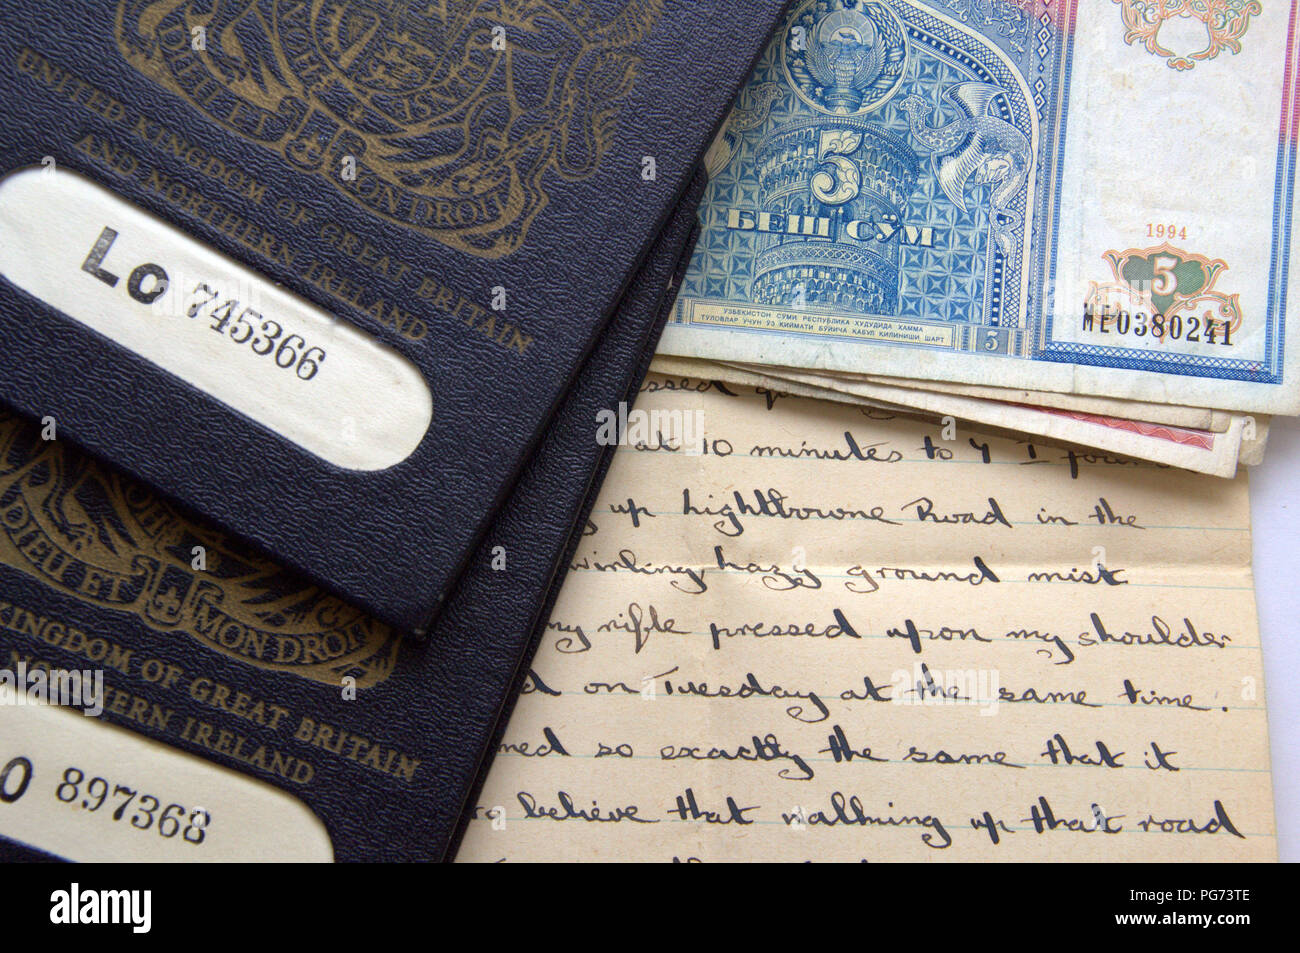 Still life shot of two old style, blue British passports with old handwritten letter and foreign banknotes Stock Photo